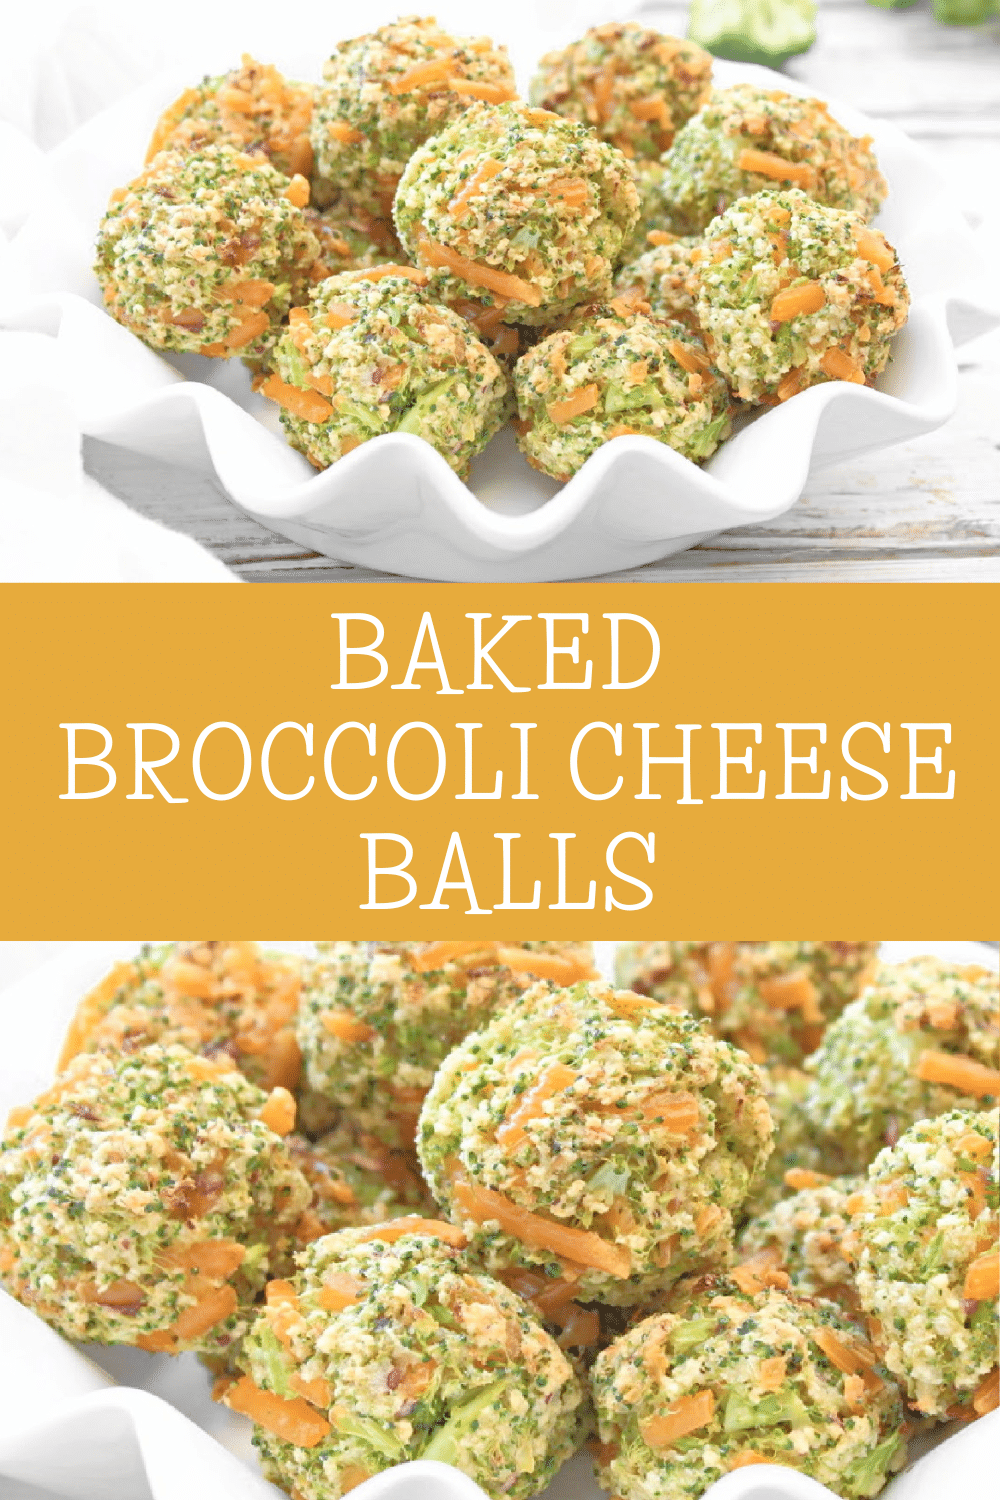 Baked Broccoli Cheese Bites ~The classic flavors of broccoli and cheddar rolled into perfectly portioned bites. Vegan recipe. via @thiswifecooks